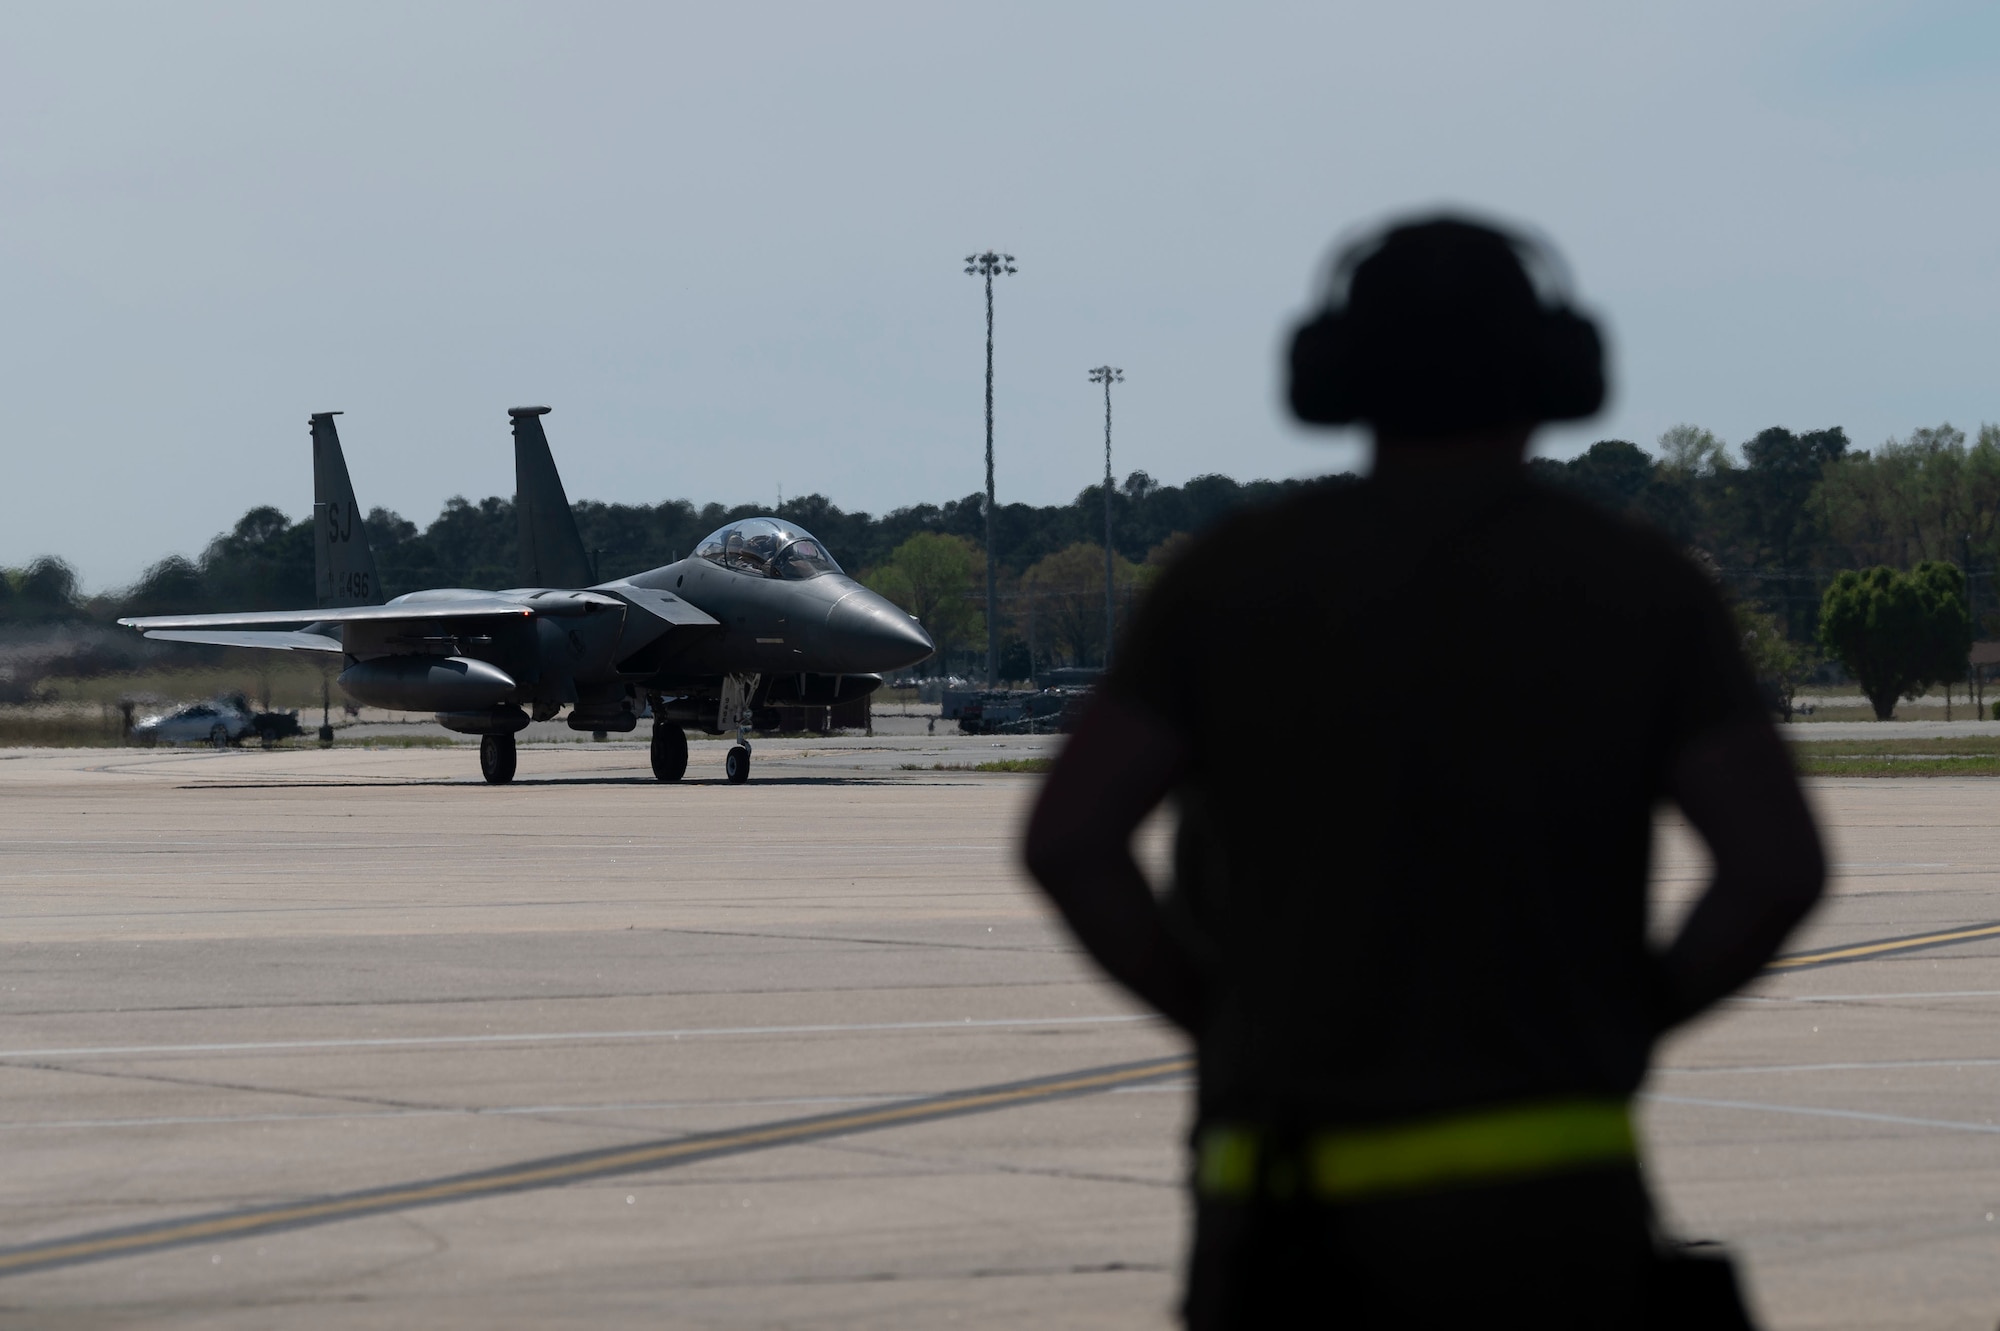 Airmen assigned to the 4th Fighter Wing arrive at Seymour Johnson Air Force Base, North Carolina, after returning from a deployment April 1, 2022. The Airmen and aircraft deployed to Europe in support of NATO operations where they ensured a protective posture of United States allies. (U.S. Air Force photo by Senior Airman Kevin Holloway)